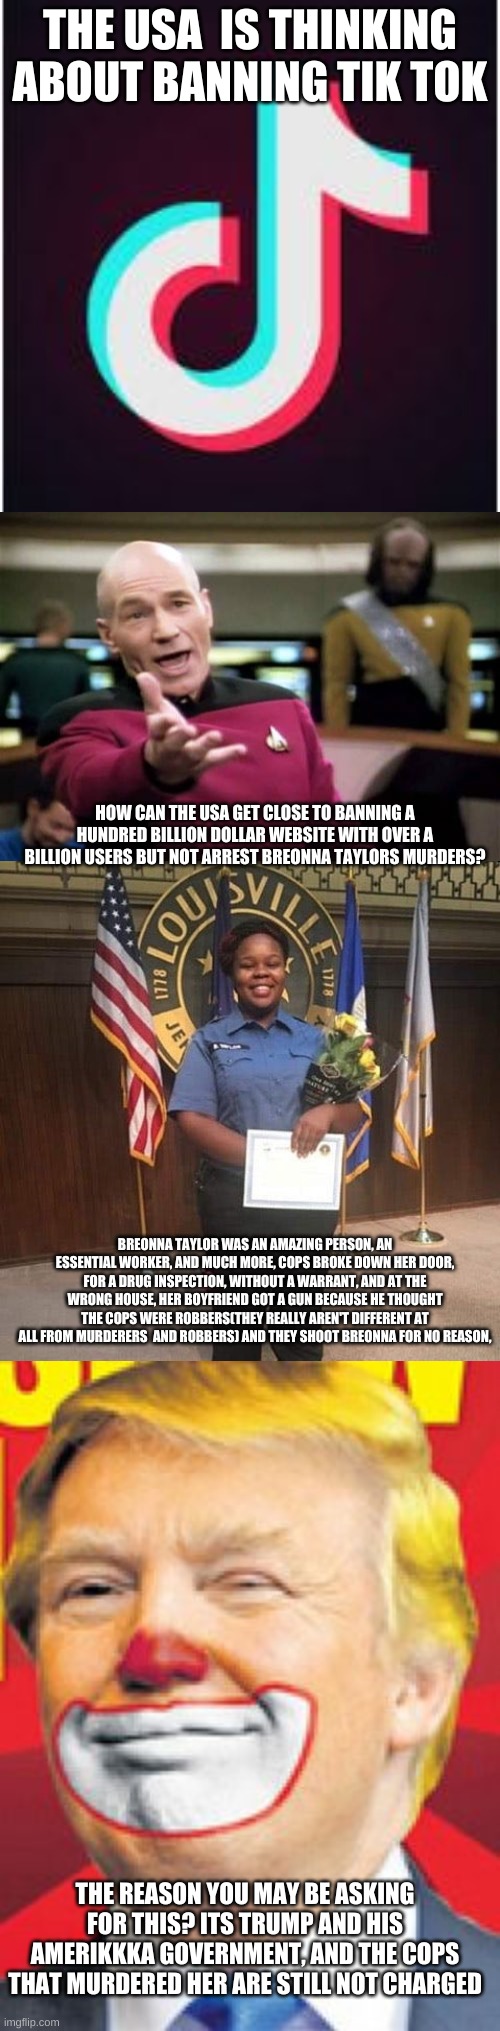 STRAIGHT UP FVCKING SHIT, WHY ARE THEY NOT IN JAIL, | THE USA  IS THINKING ABOUT BANNING TIK TOK; HOW CAN THE USA GET CLOSE TO BANNING A HUNDRED BILLION DOLLAR WEBSITE WITH OVER A BILLION USERS BUT NOT ARREST BREONNA TAYLORS MURDERS? BREONNA TAYLOR WAS AN AMAZING PERSON, AN ESSENTIAL WORKER, AND MUCH MORE, COPS BROKE DOWN HER DOOR, FOR A DRUG INSPECTION, WITHOUT A WARRANT, AND AT THE WRONG HOUSE, HER BOYFRIEND GOT A GUN BECAUSE HE THOUGHT THE COPS WERE ROBBERS(THEY REALLY AREN'T DIFFERENT AT ALL FROM MURDERERS  AND ROBBERS) AND THEY SHOOT BREONNA FOR NO REASON, THE REASON YOU MAY BE ASKING FOR THIS? ITS TRUMP AND HIS AMERIKKKA GOVERNMENT, AND THE COPS THAT MURDERED HER ARE STILL NOT CHARGED | image tagged in memes,picard wtf,donald trump the clown,tik tok,remember breonna taylor,repost this if you want | made w/ Imgflip meme maker